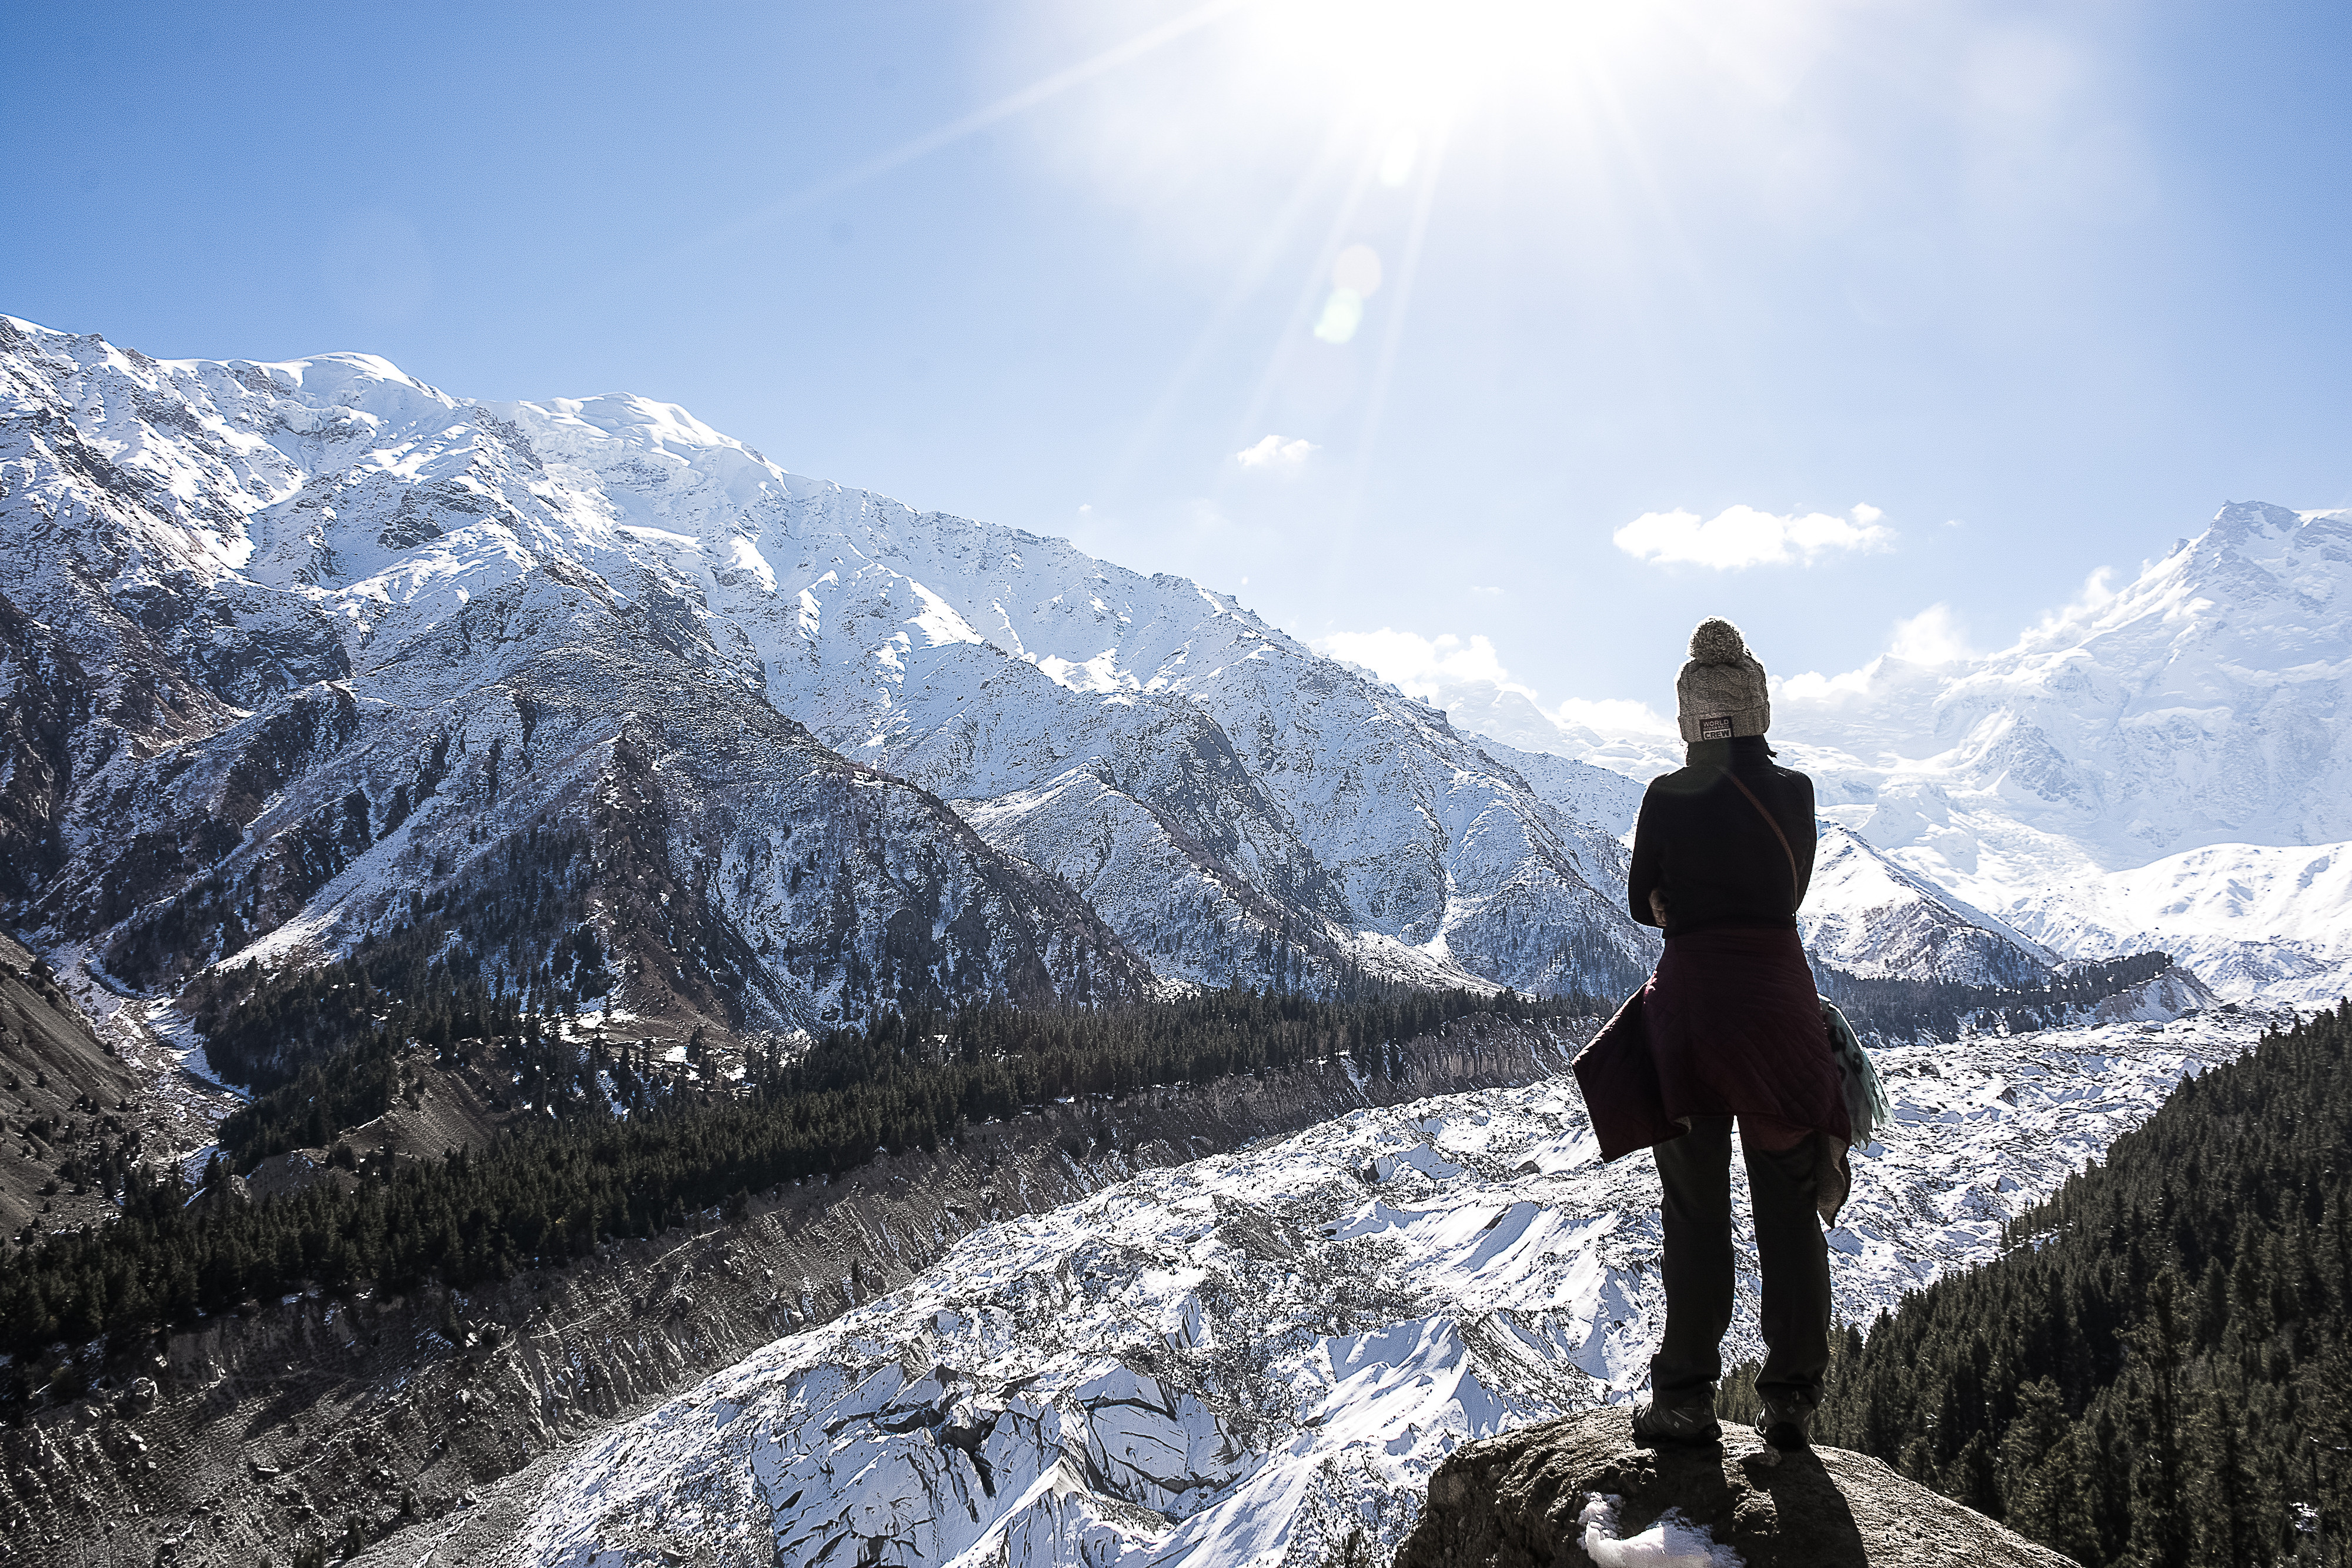 A hiker stops to take in the view of Nangar Parbat. Photo: Shutterstock Images